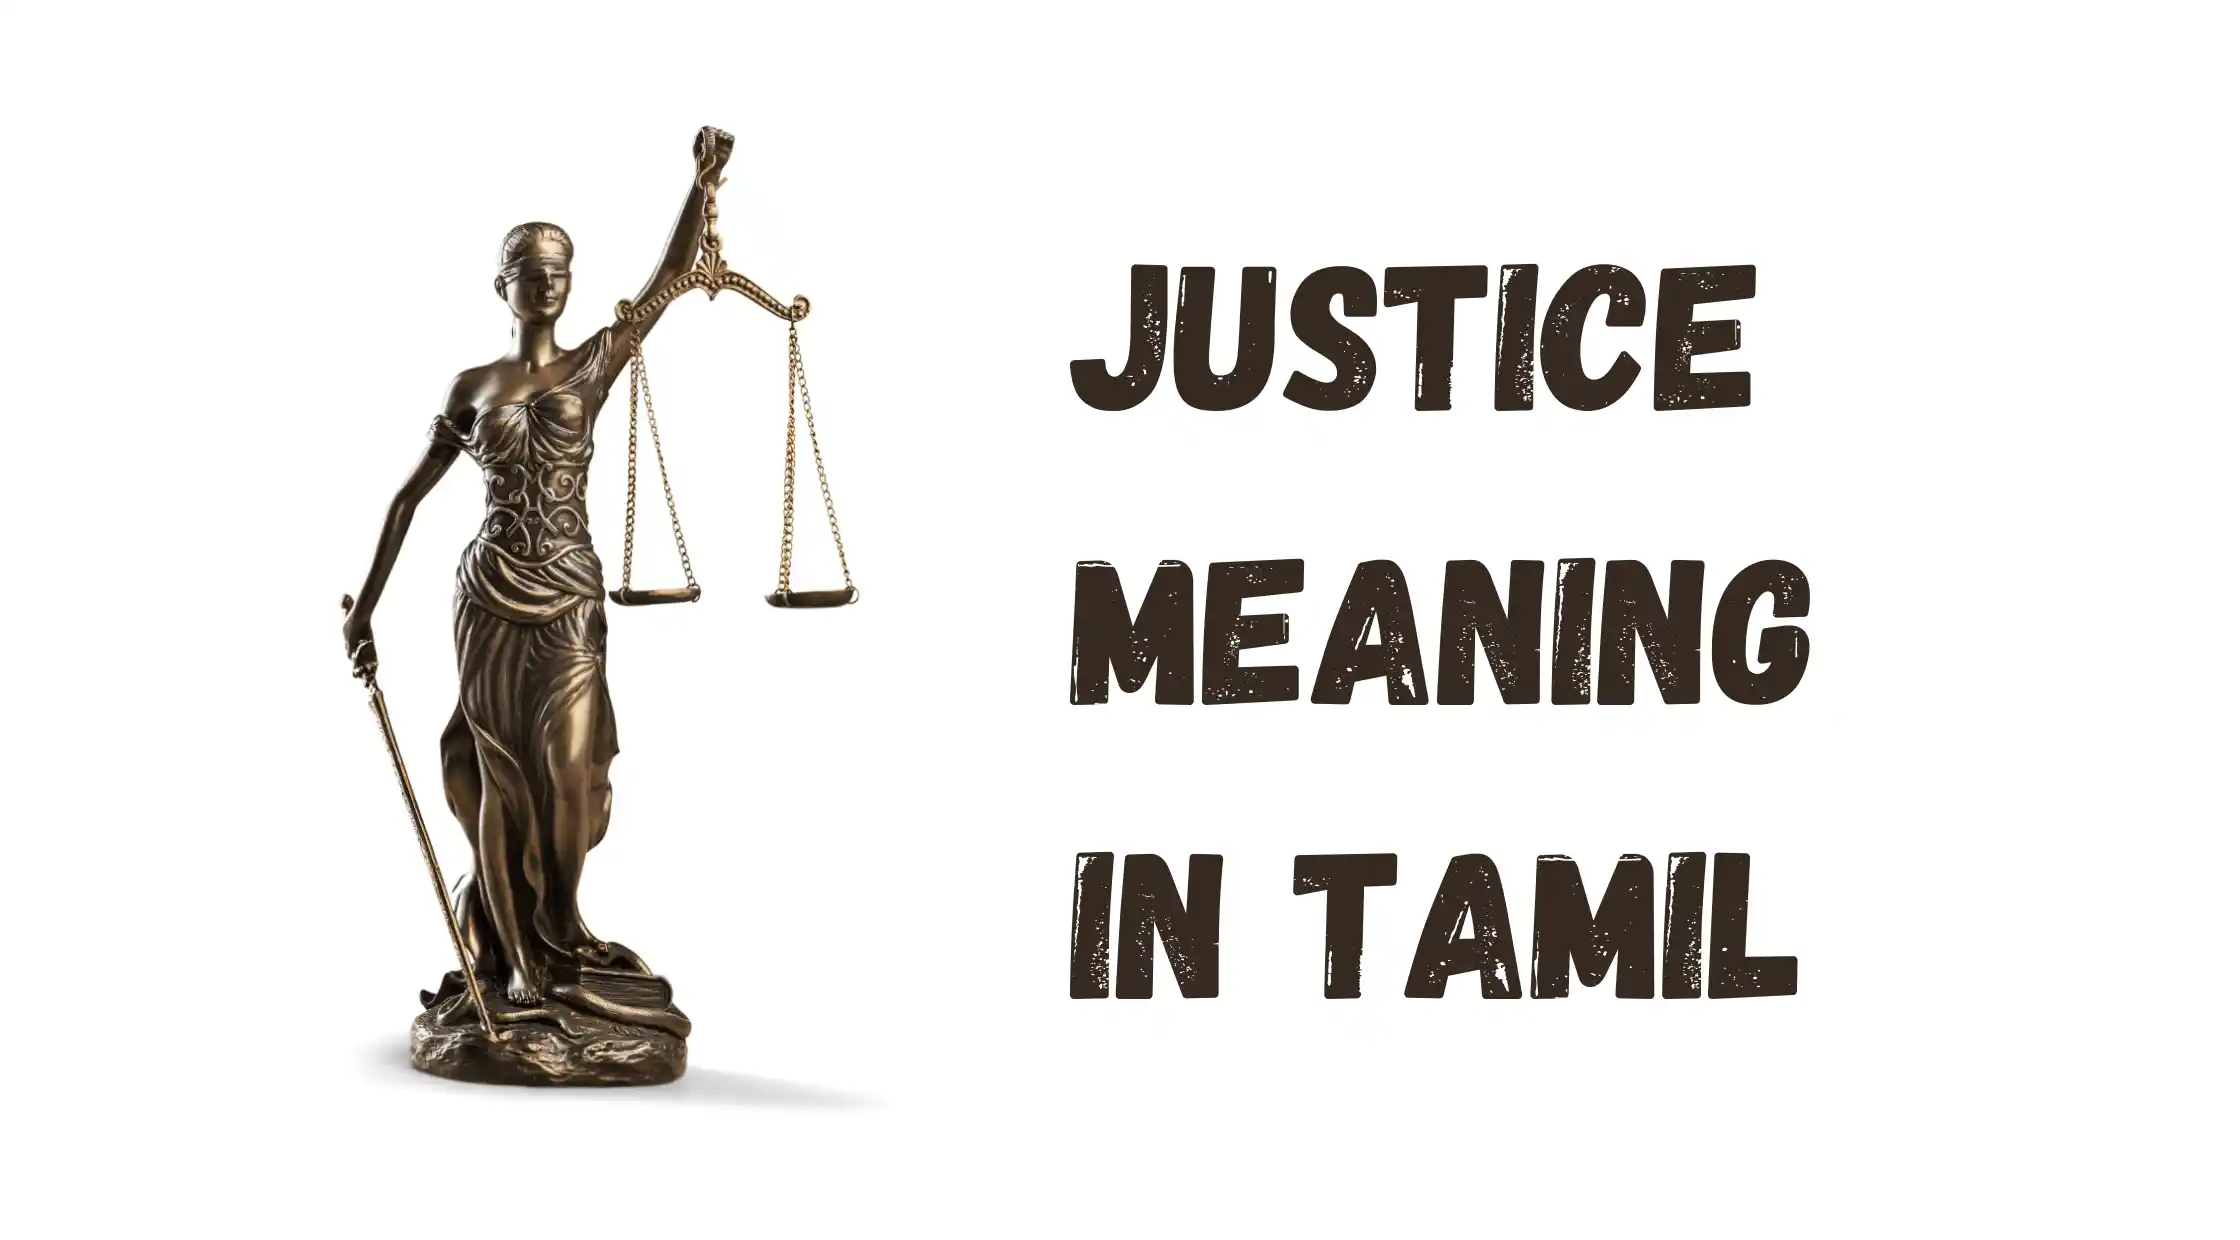 Justice Meaning